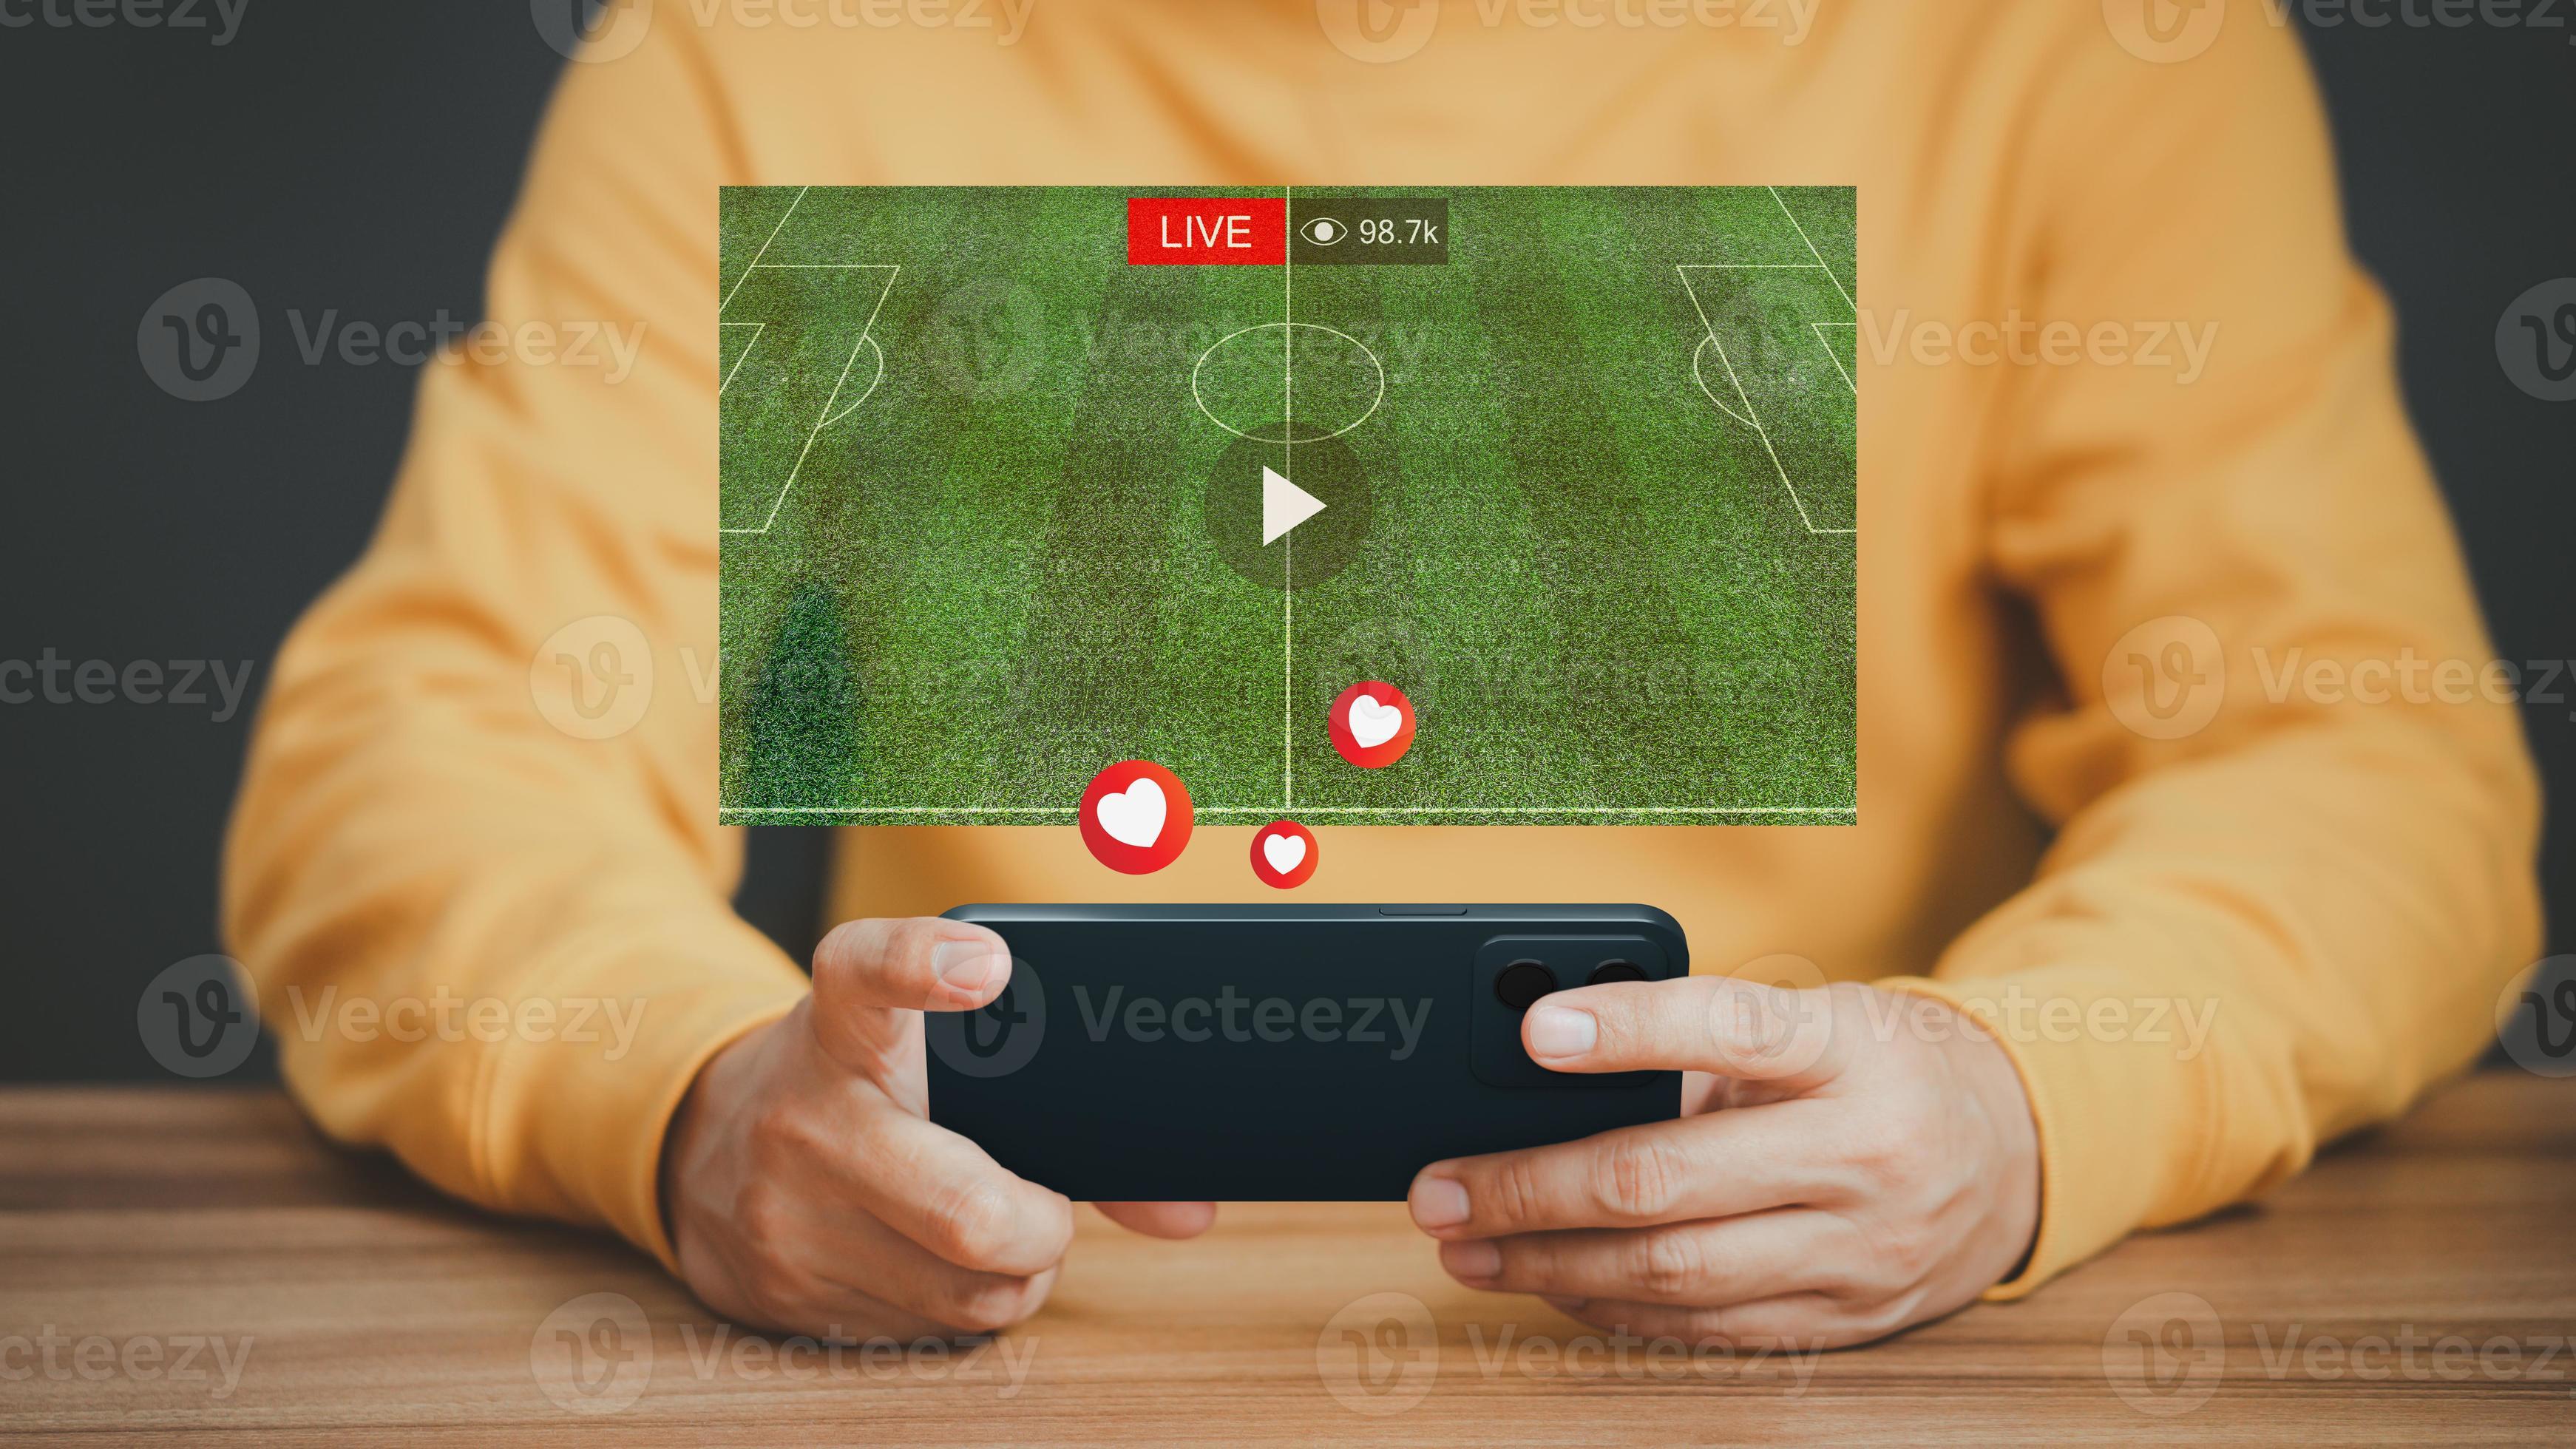 Man using a smartphone or mobile phone for watching live football streaming online on virtual screen, searching video on internet, concept of content online